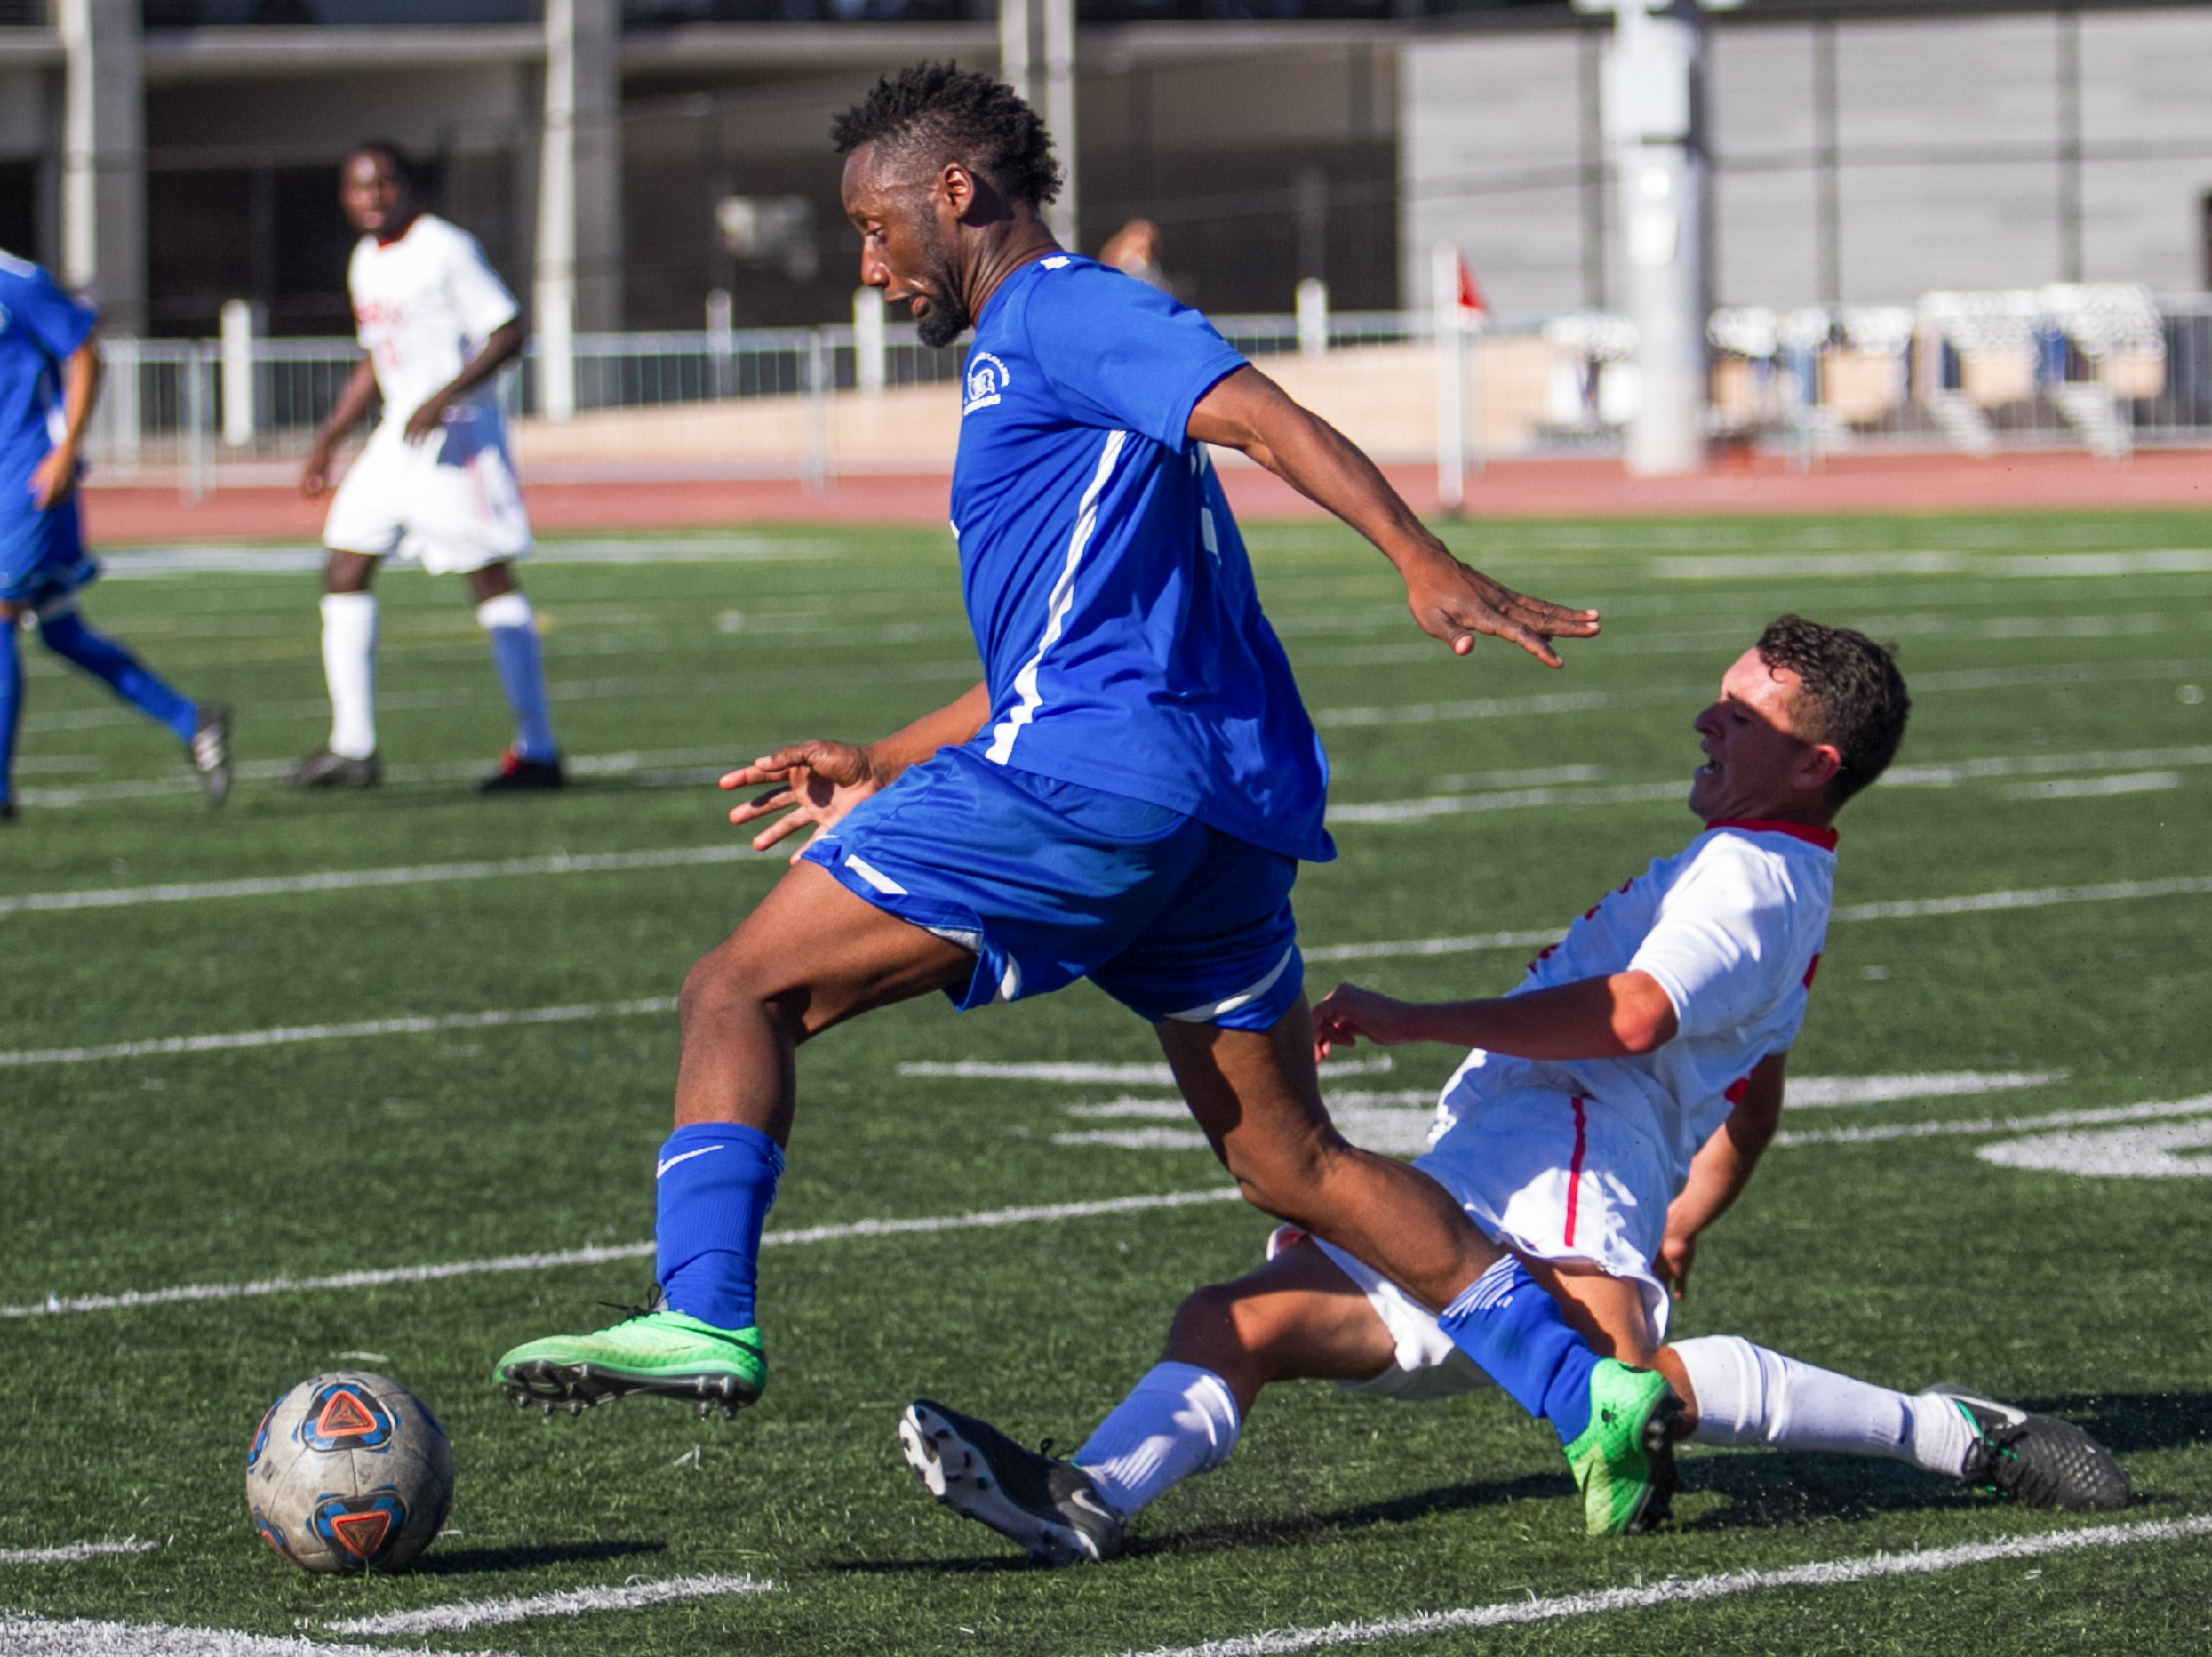  Santa Monica College Corsair Cyrille Njomo (17)(L) fights for possession of the ball  against Santa Barbara City College Vaquero Jessie Jimenez (8)(R) on Tuesday, October 24, 2017, on the Corsair Field at Santa Monica College in Santa Monica, Califo